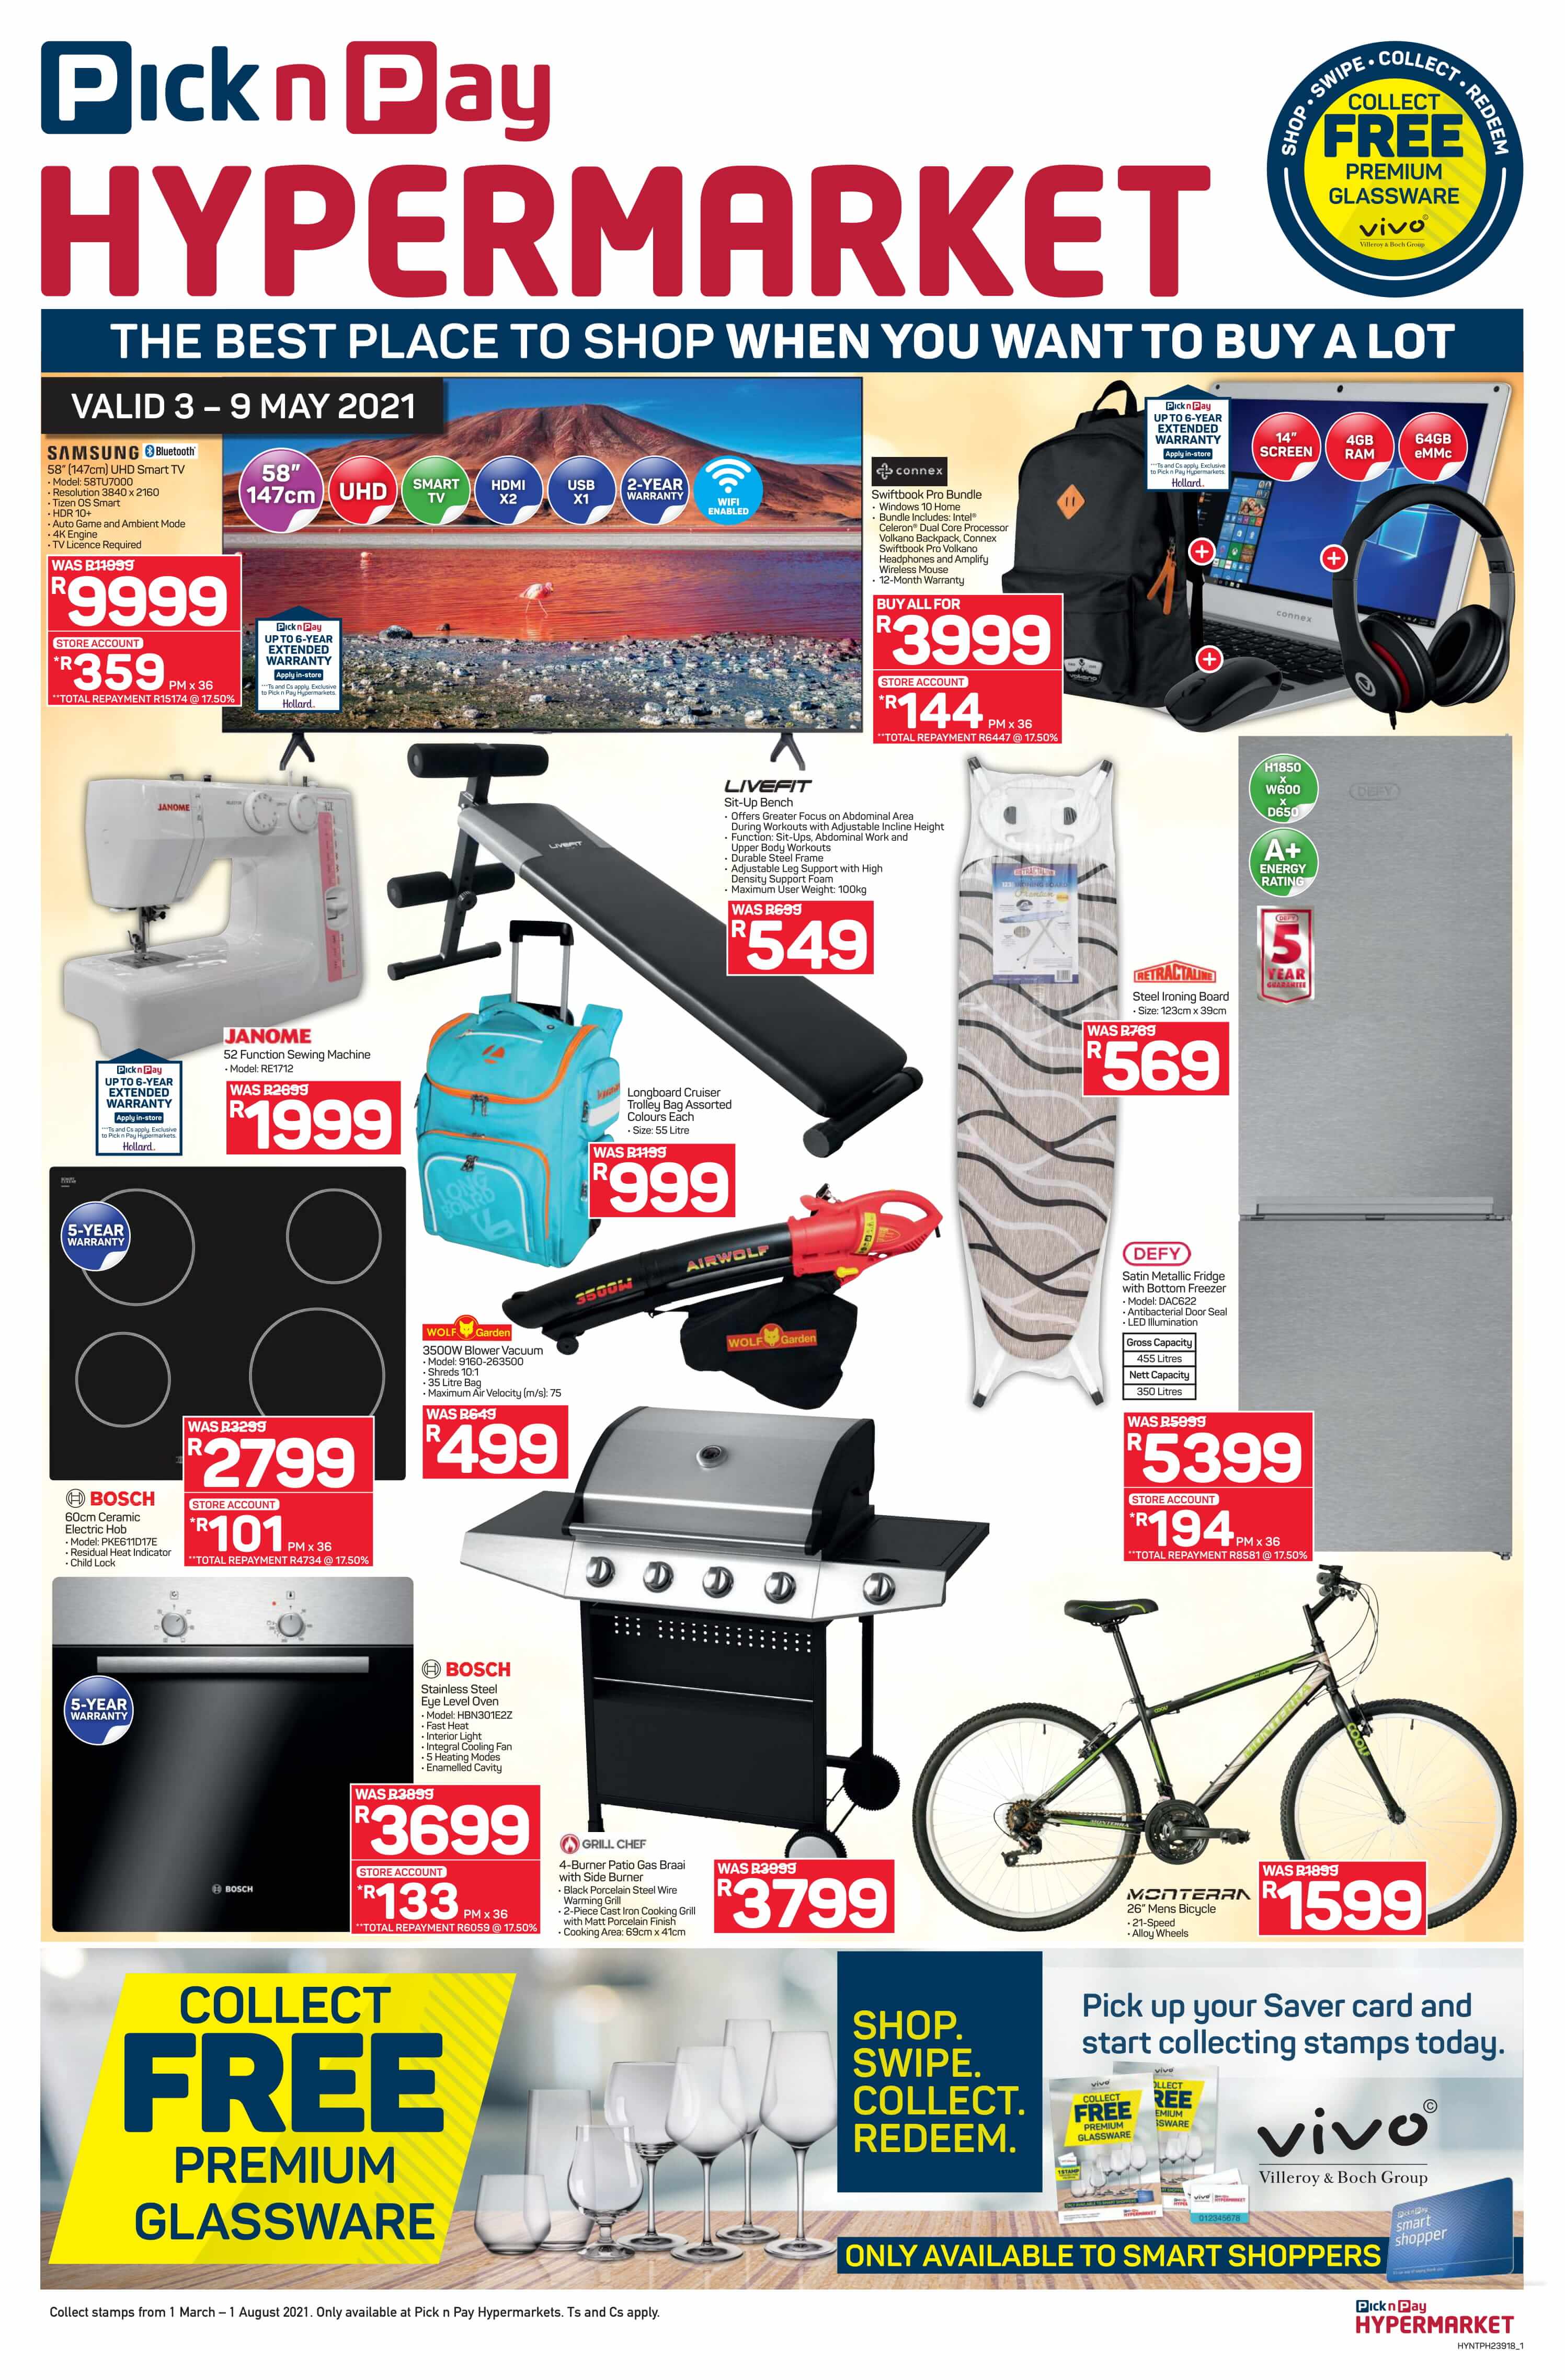 Pick n Pay Specials Hypermarket 3 – 9 May 2021